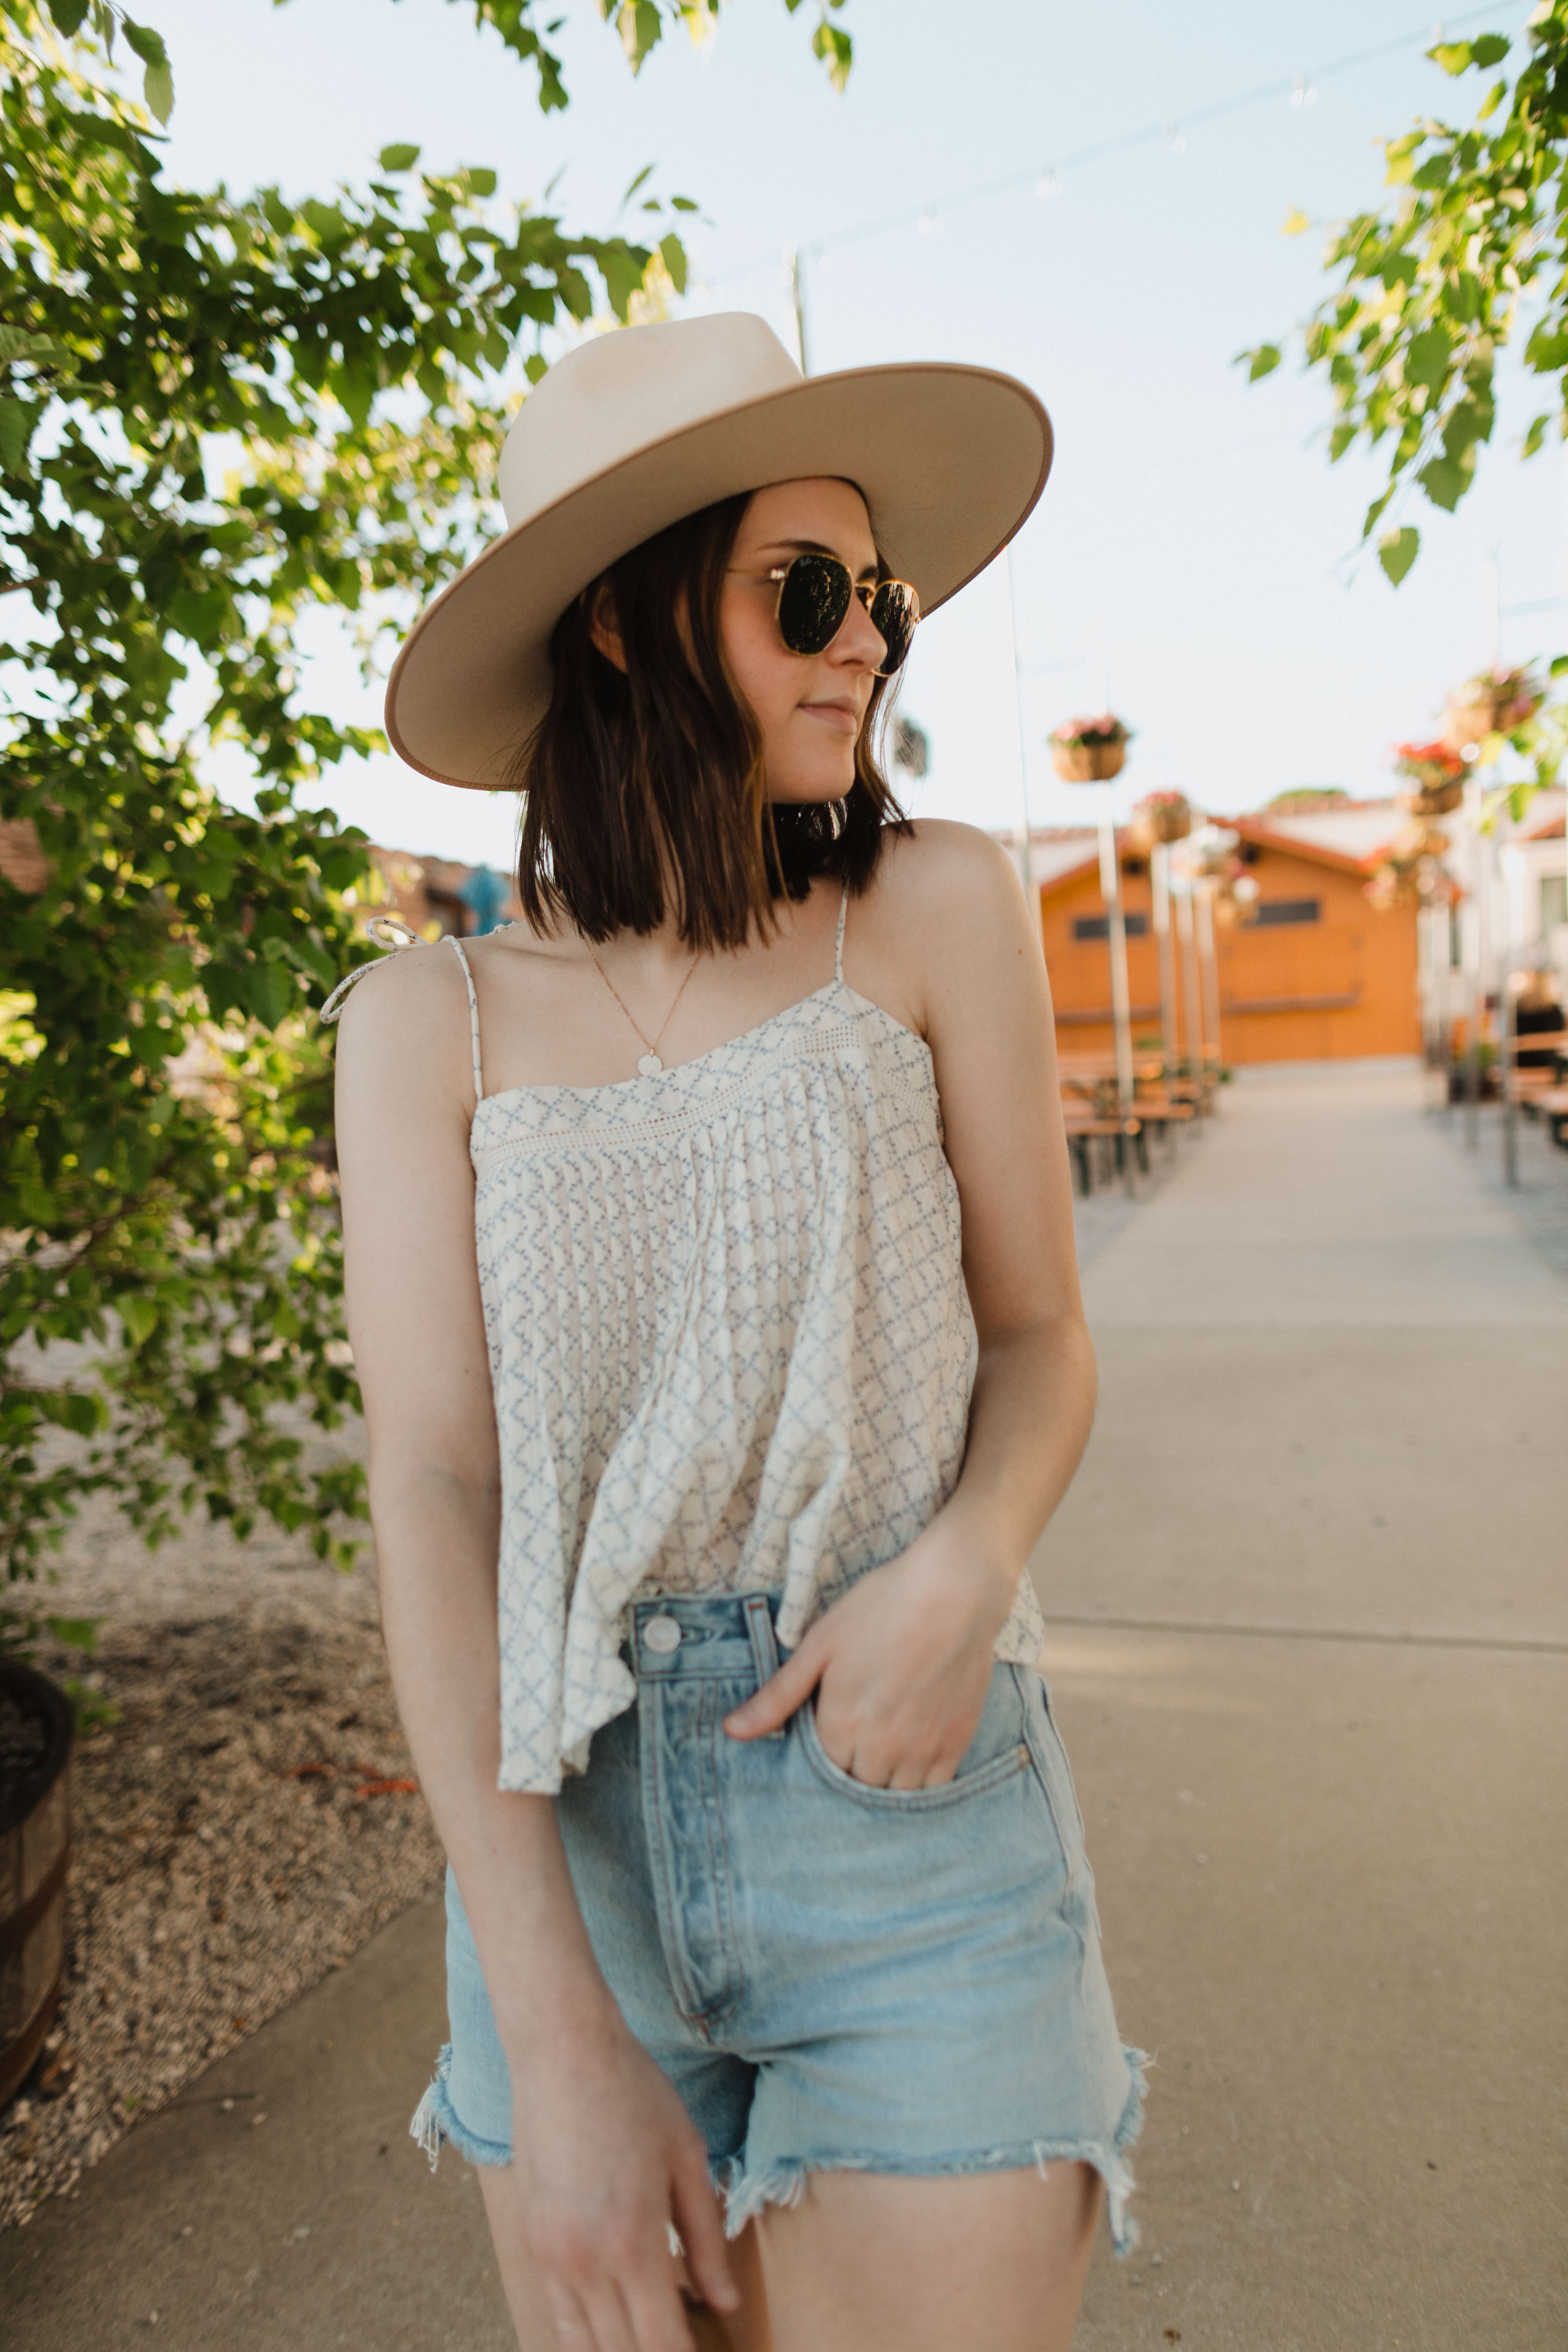 Lovestitch Clothing: 7 Outfits To Wear This Summer | summer outfit ideas casual | summer outfit ideas easy | agolde shorts | camisole outfit summer | camisole outfit casual | Oh Darling Blog